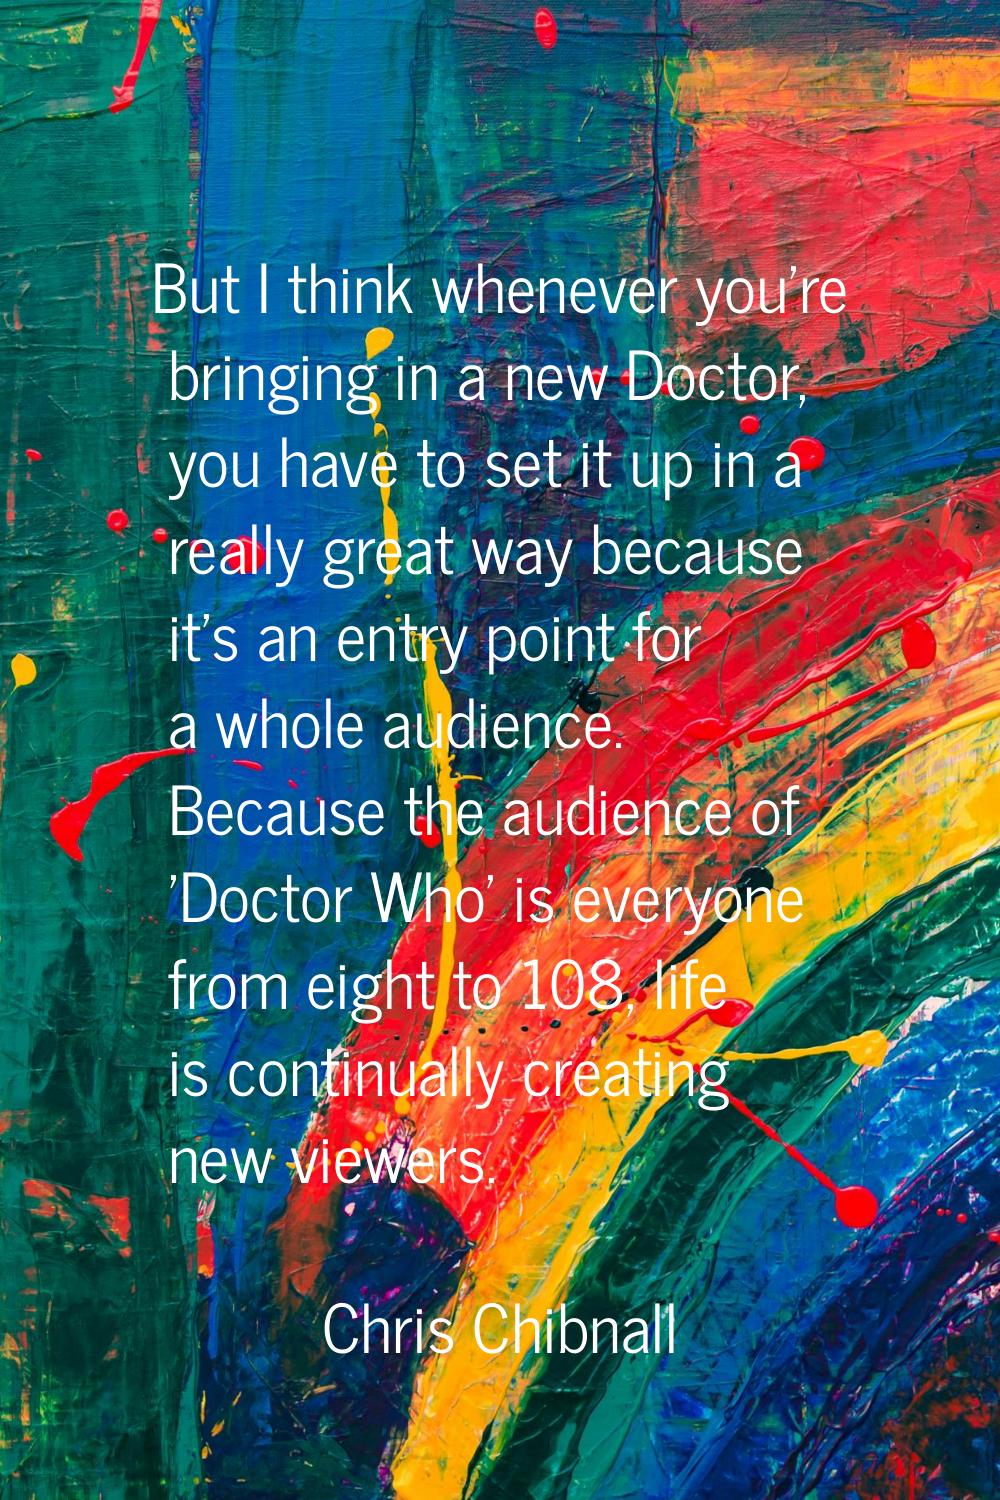 But I think whenever you're bringing in a new Doctor, you have to set it up in a really great way b